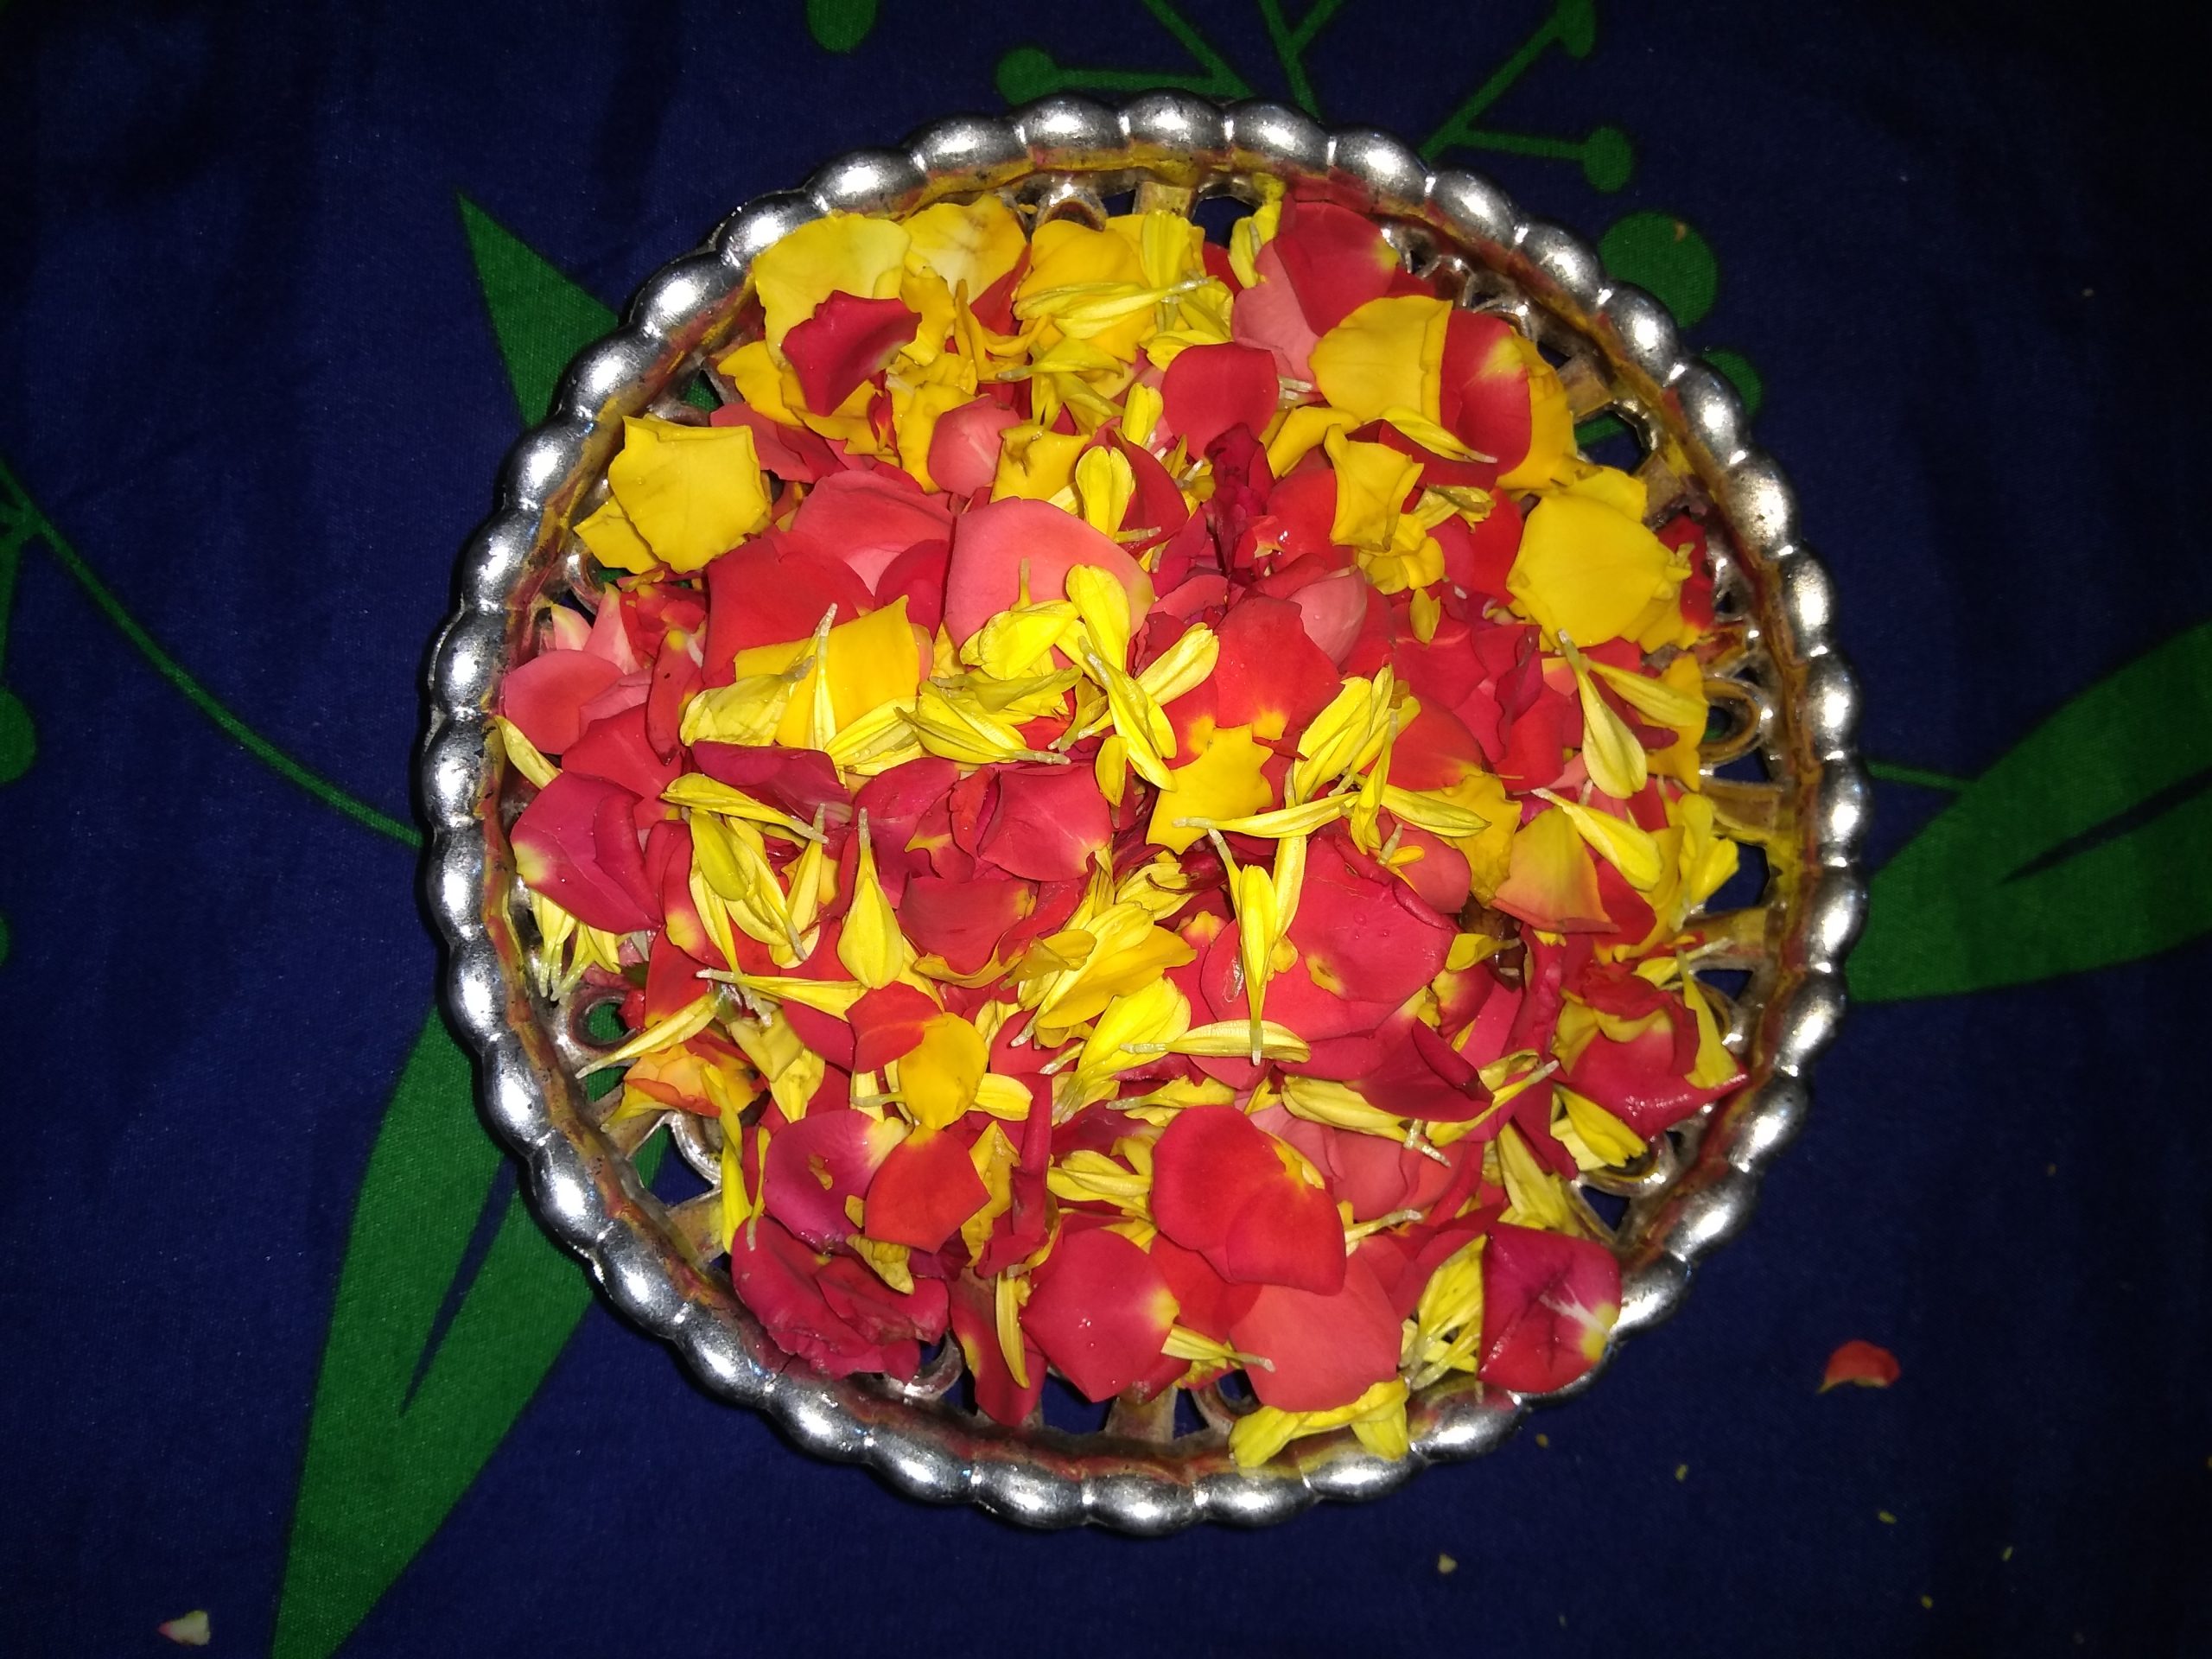 Flower petals in a plate